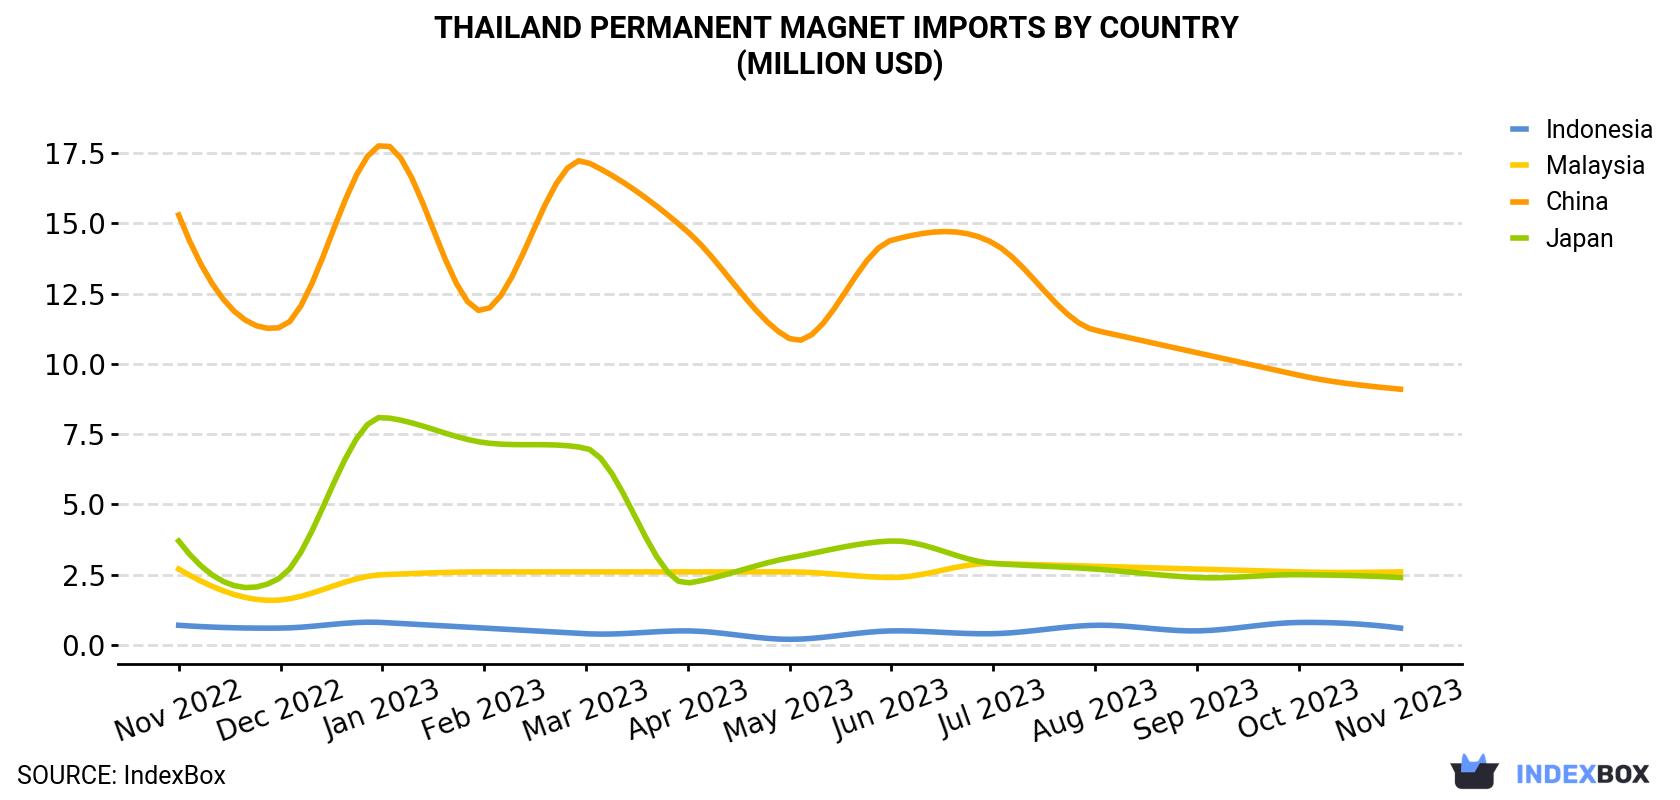 Thailand Permanent Magnet Imports By Country (Million USD)